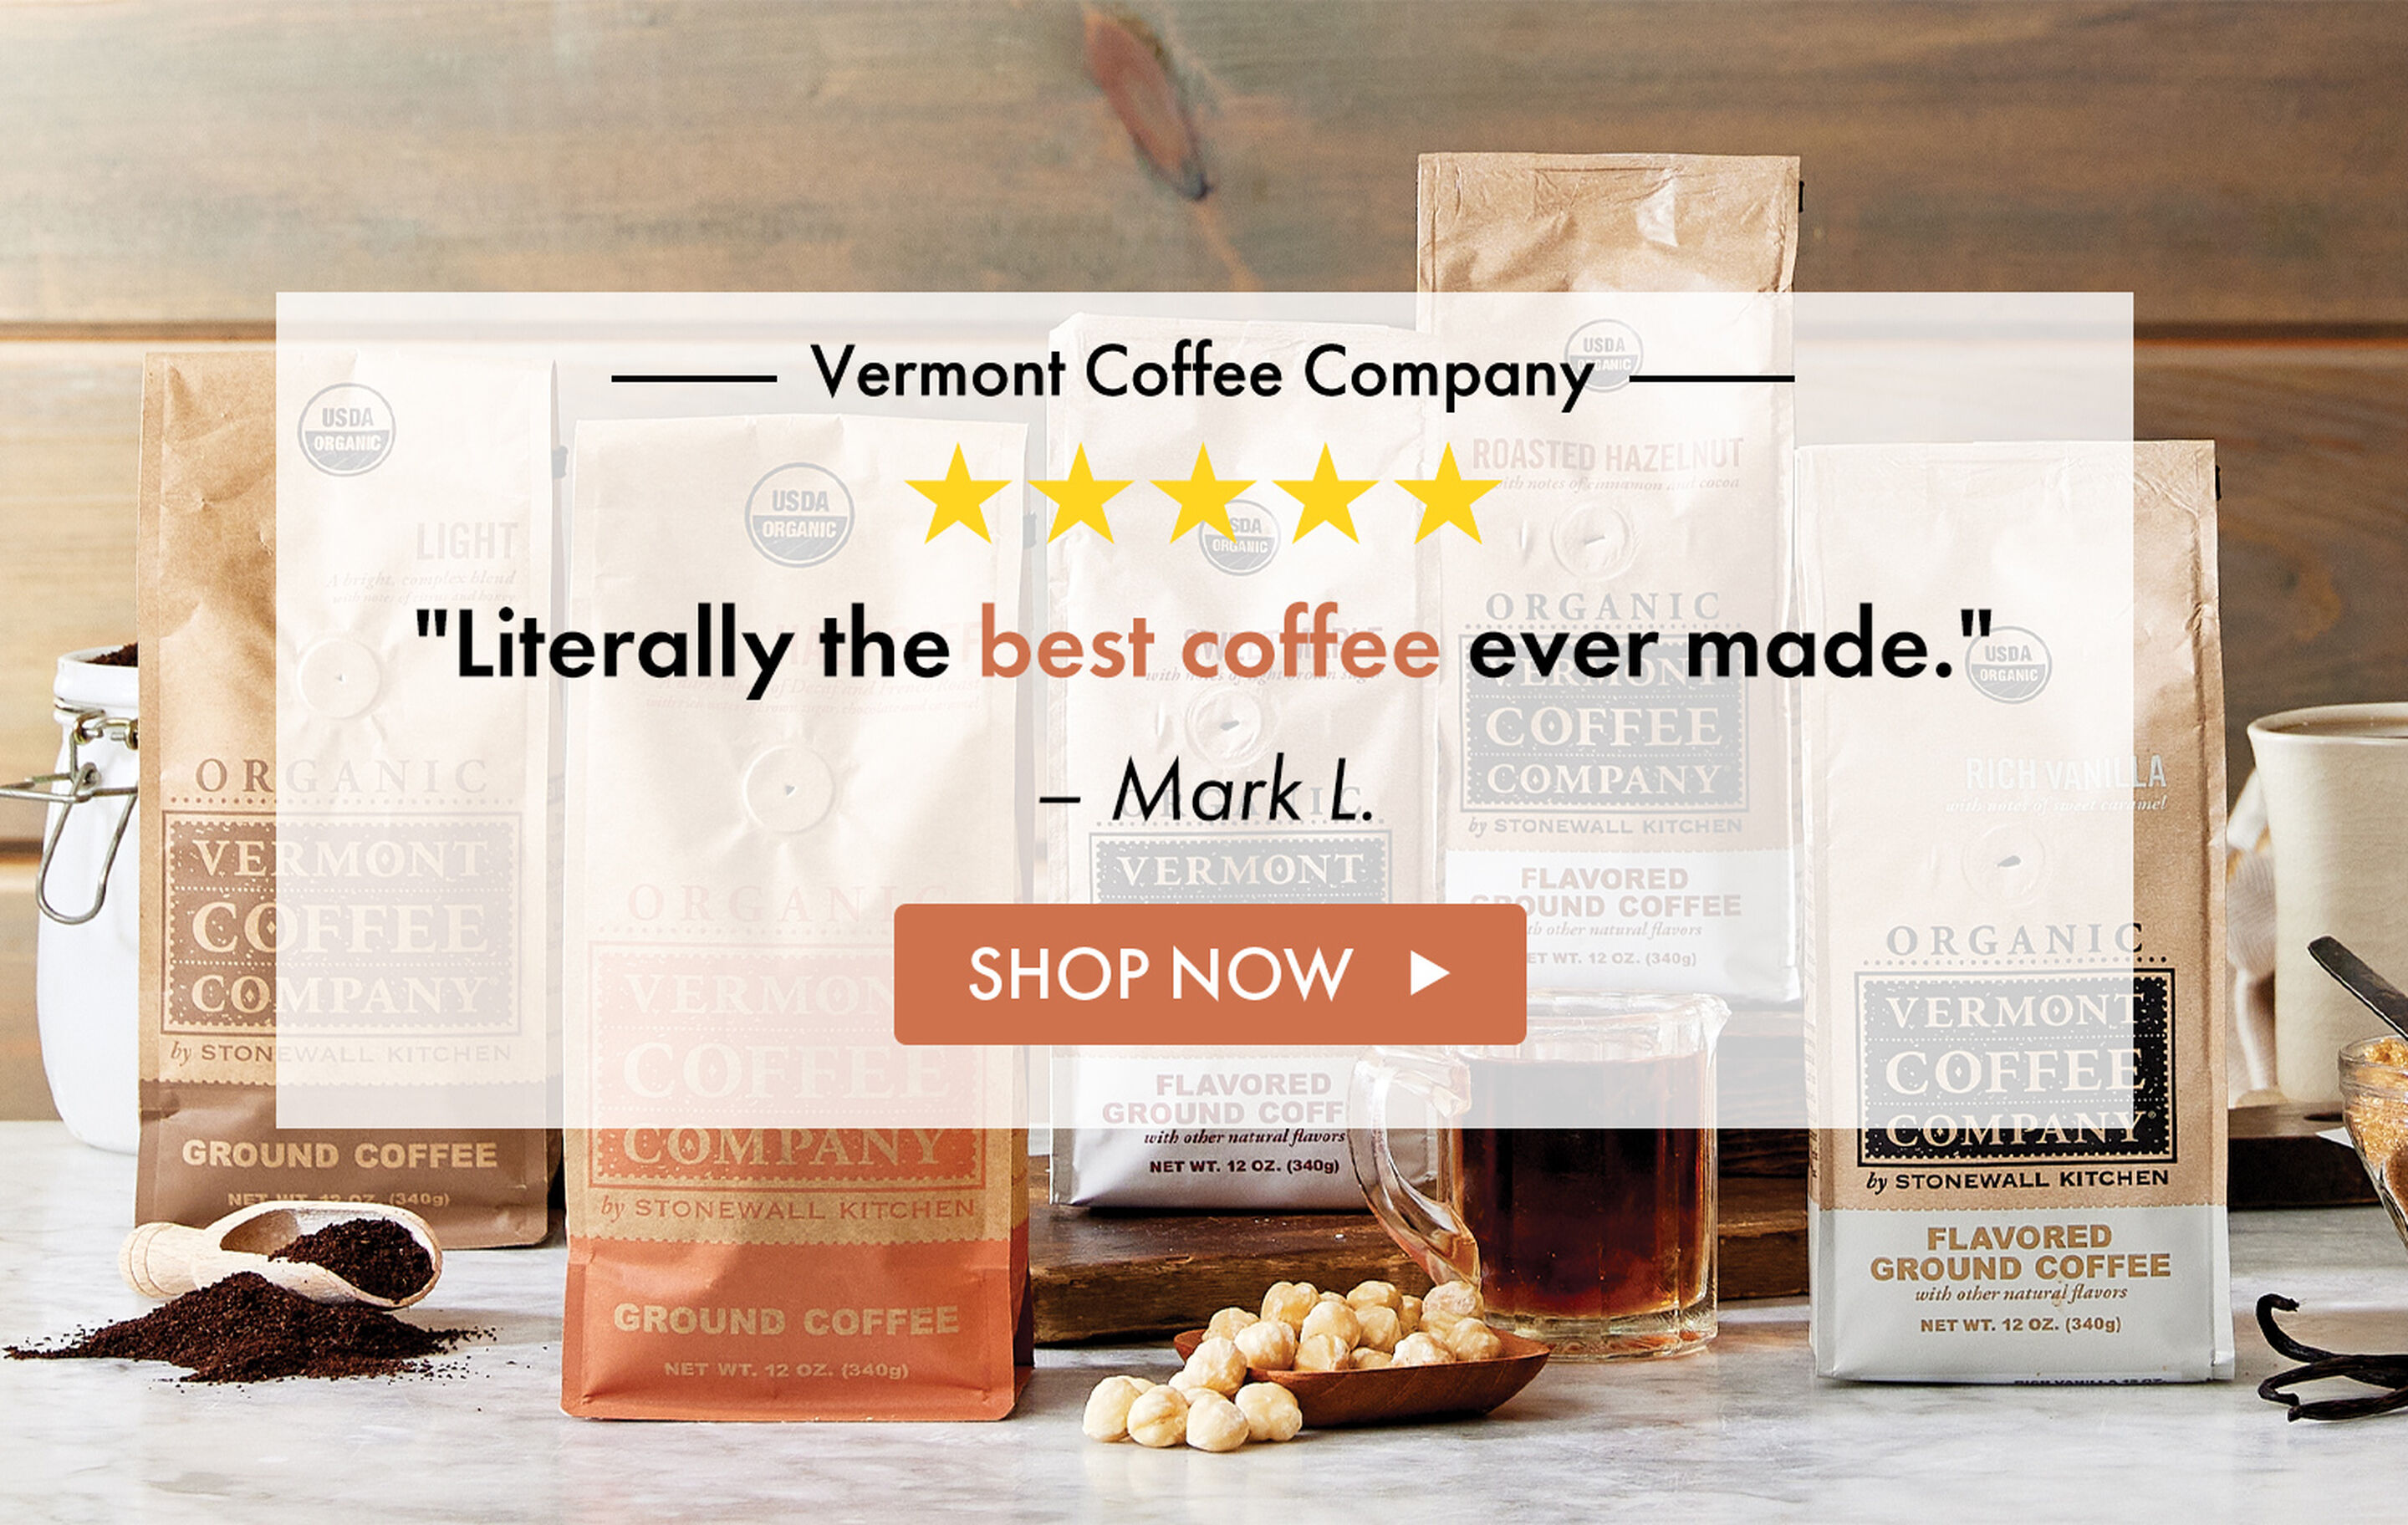 Vermont Coffee Company - 5 Stars - "Literally the best coffee ever made." - Mark L. - Shop Now